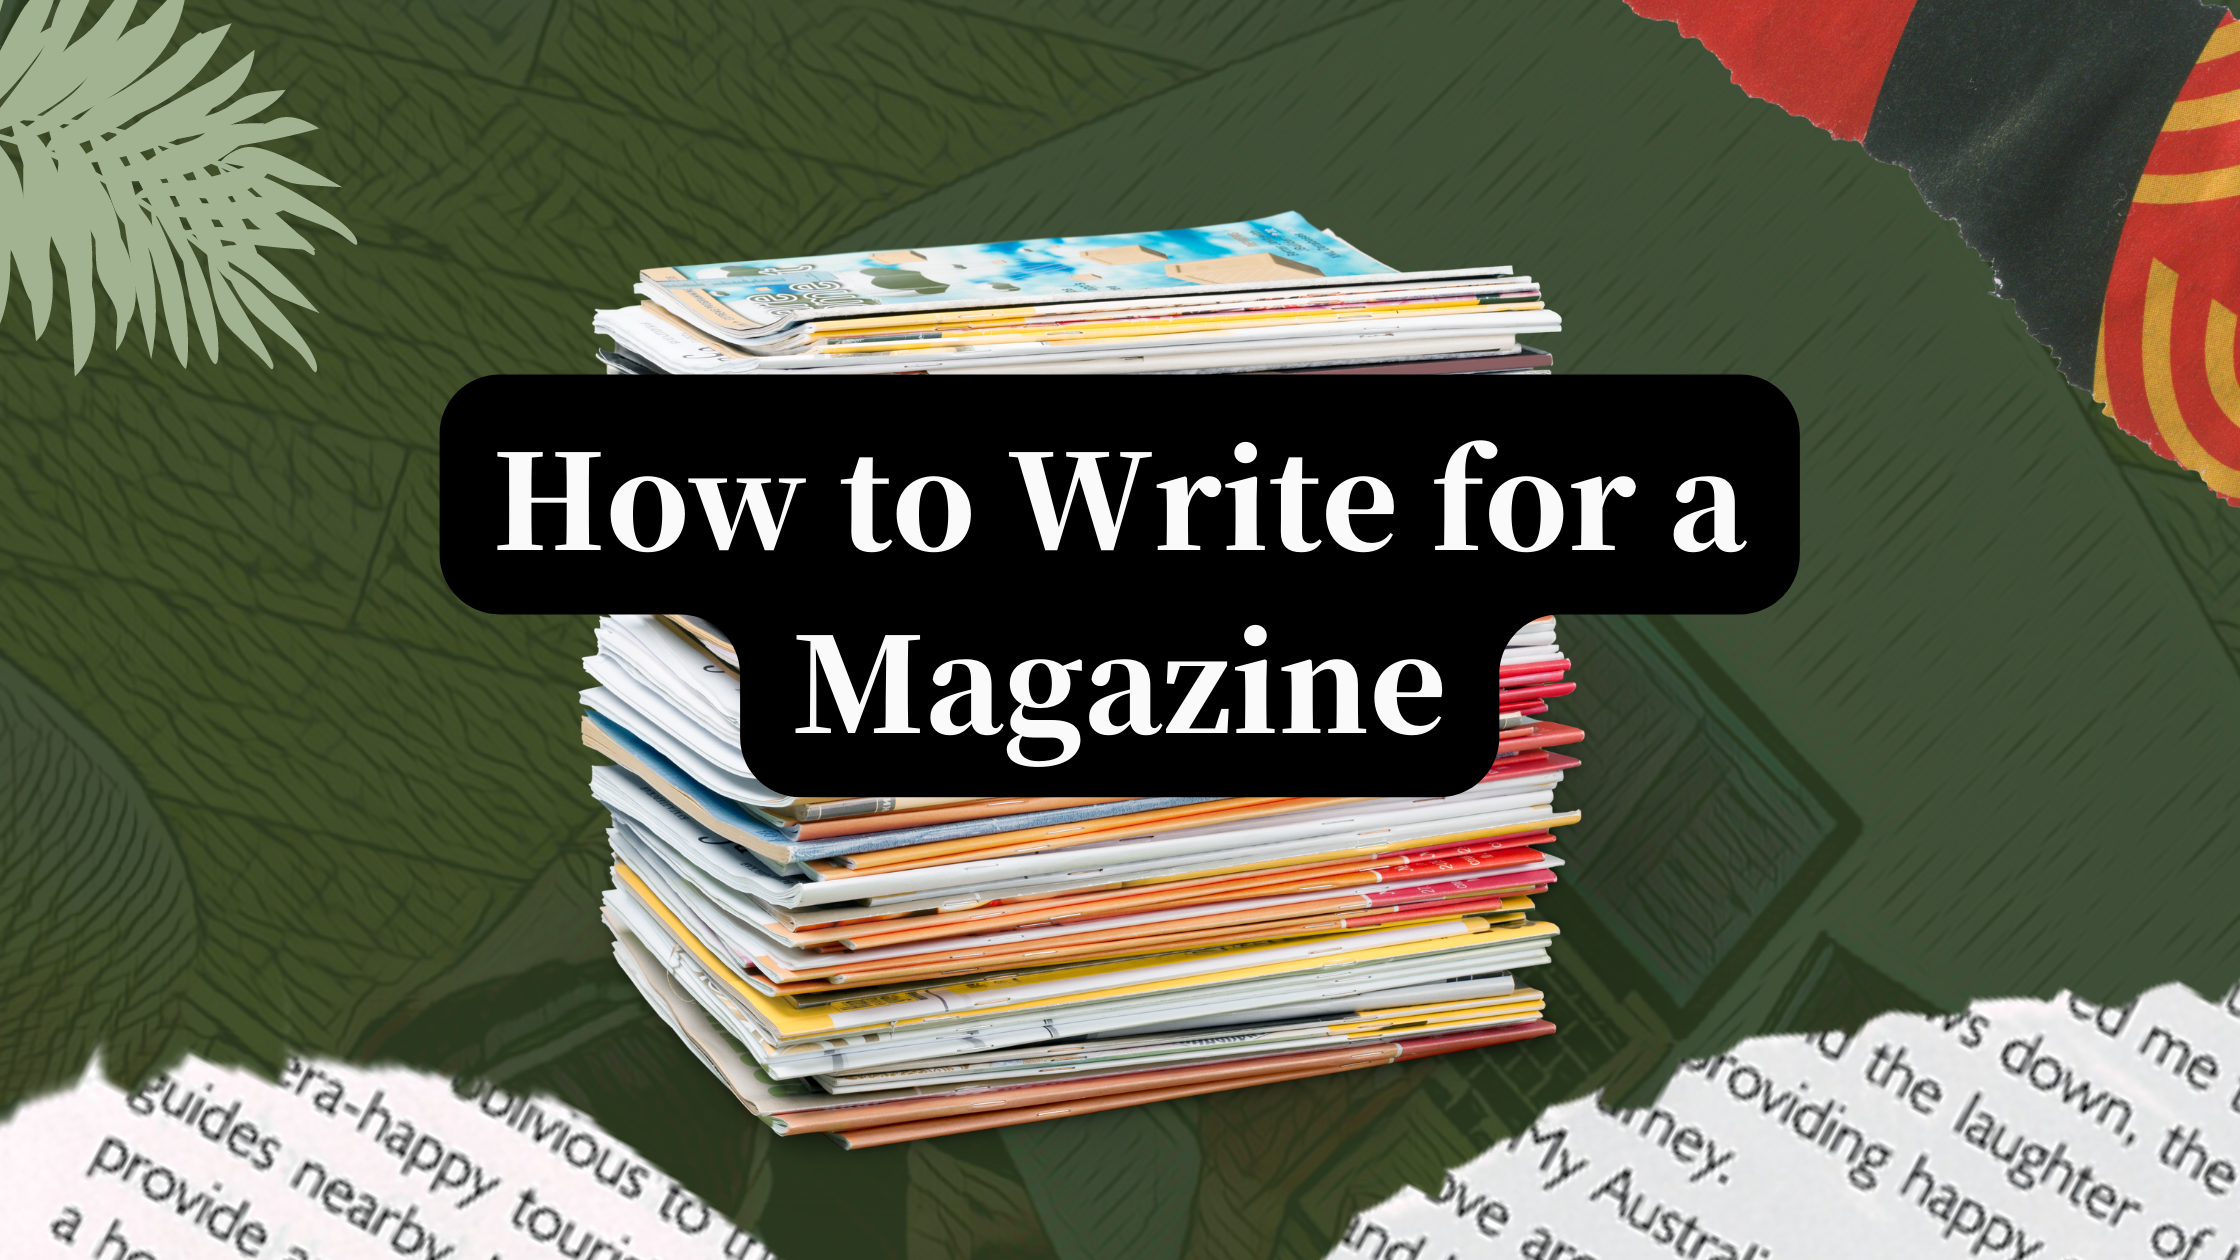 How to Write an Article for a Magazine